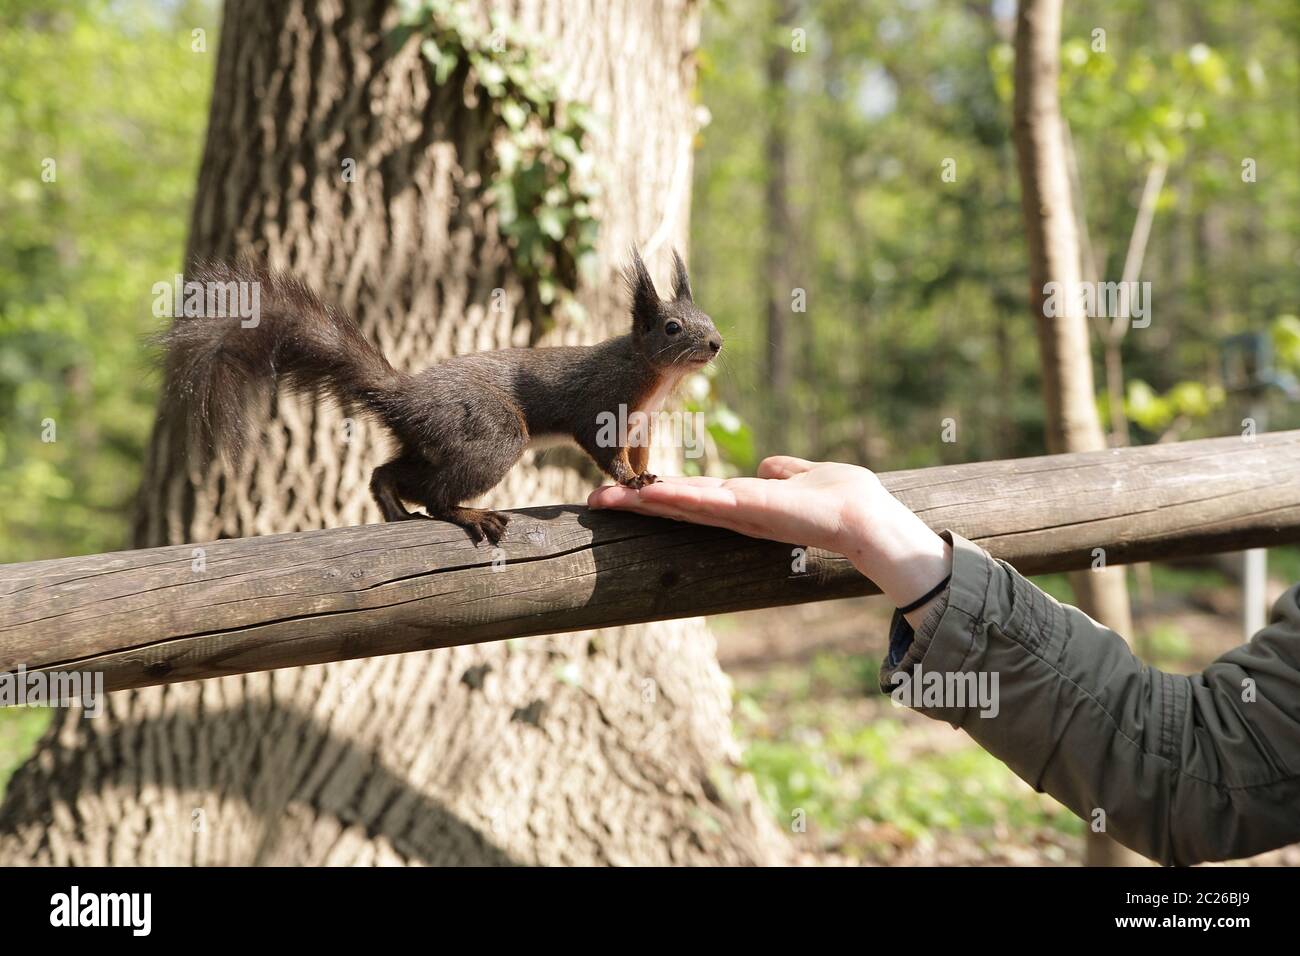 Woman feeding a squirrel with her hand. Stock Photo